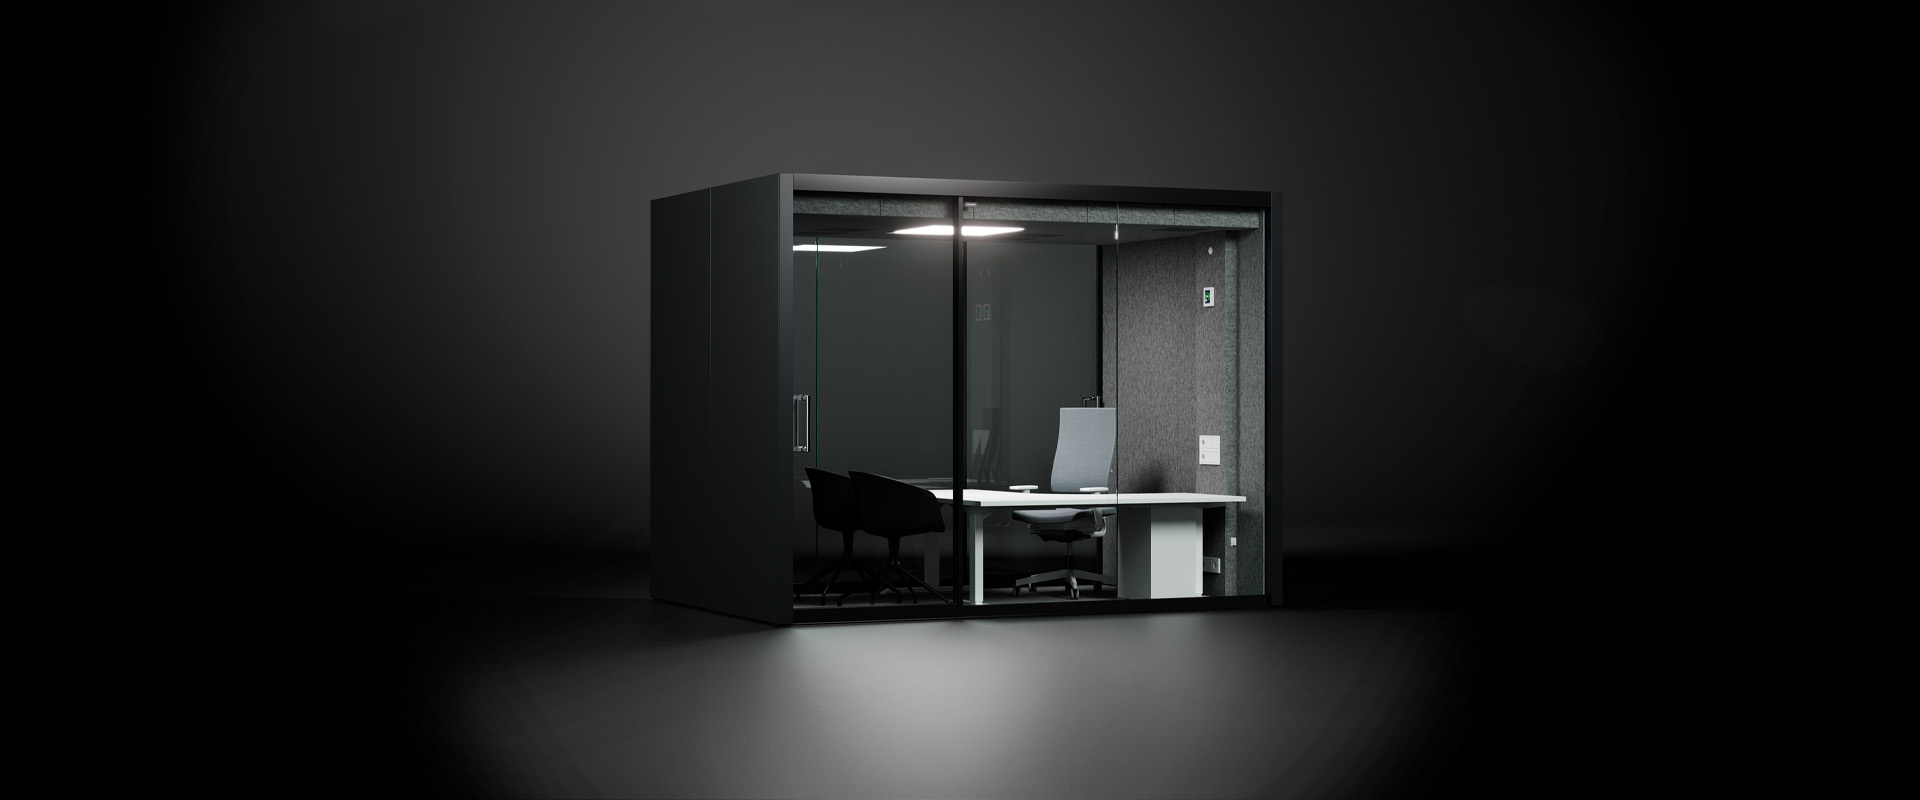 VETROSPACE L customer service point soundproof meeting pod in black background